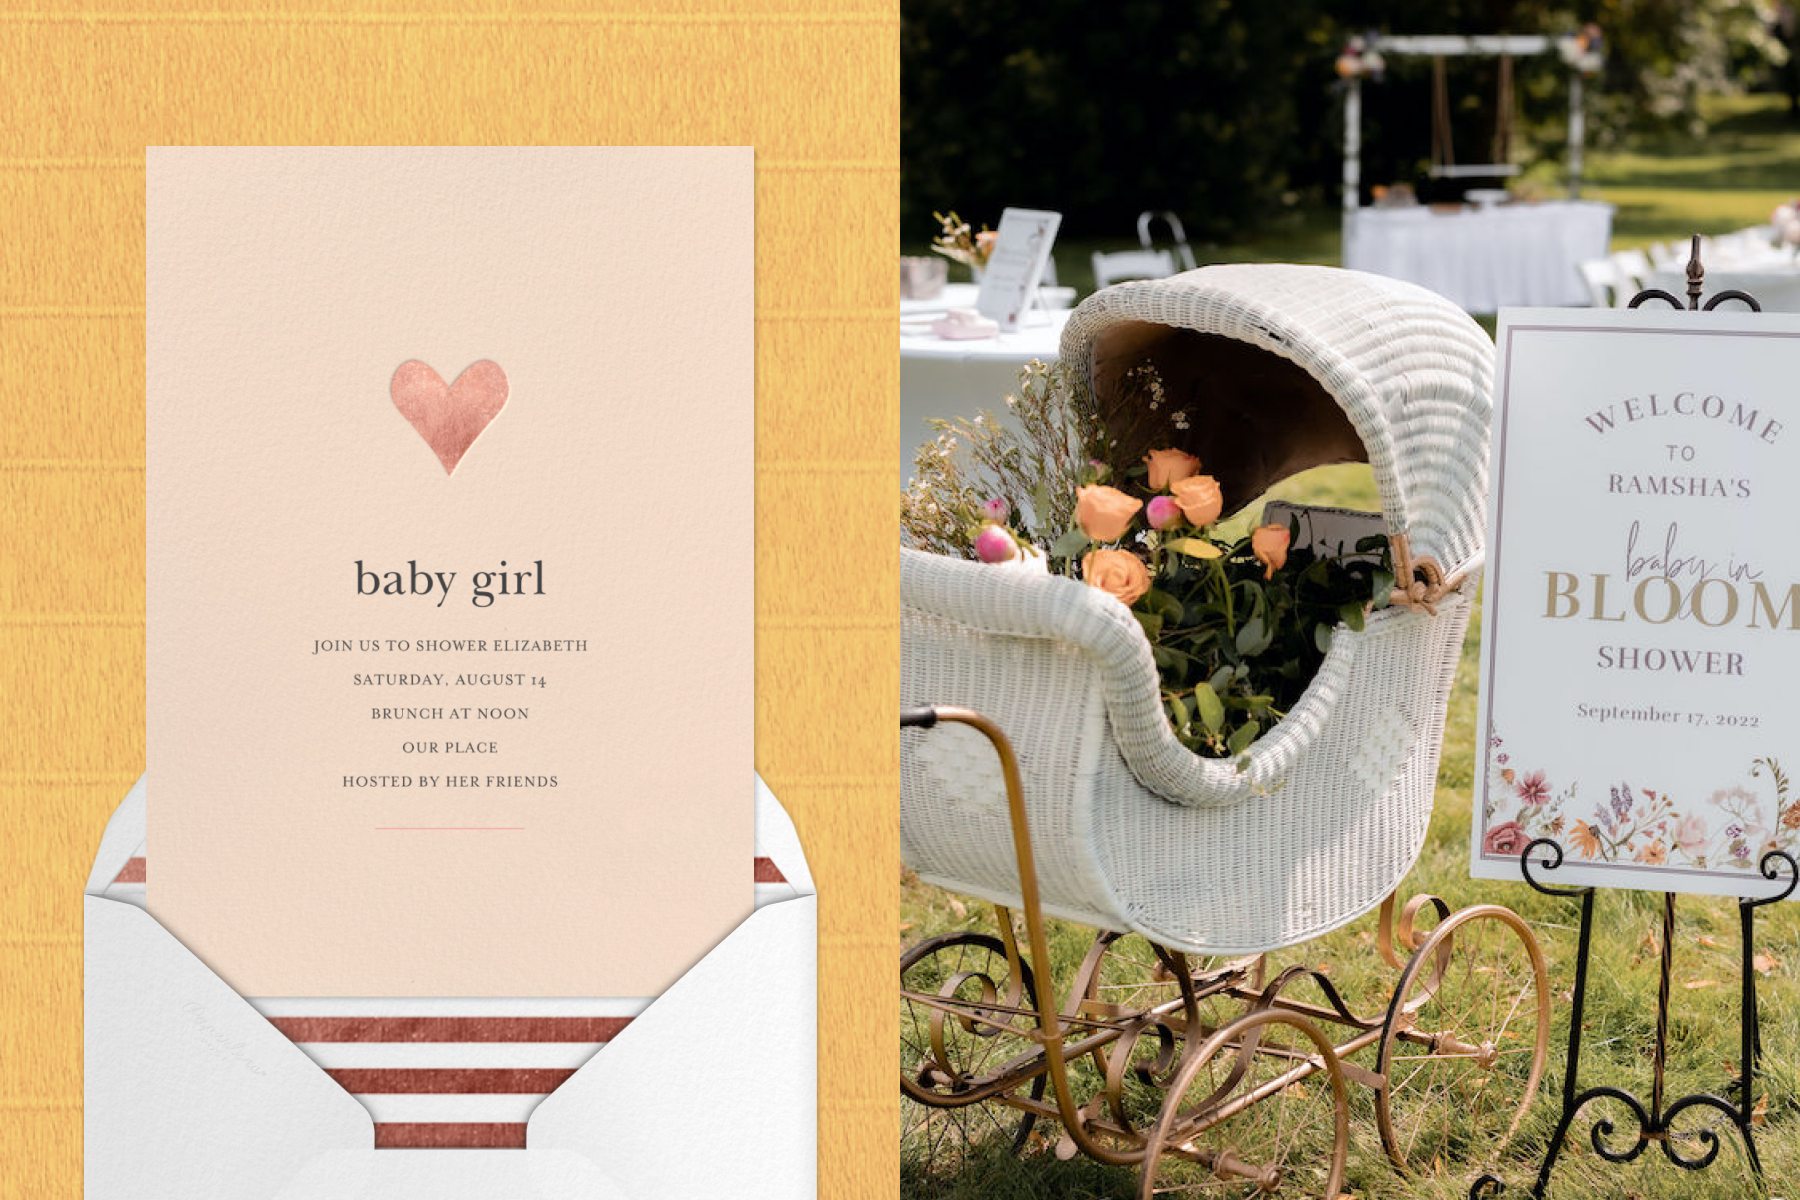 A light pink invitation has a pink foil heart and the words ‘baby girl;’ a wicker baby carriage full of flowers next to a baby shower welcome sign.